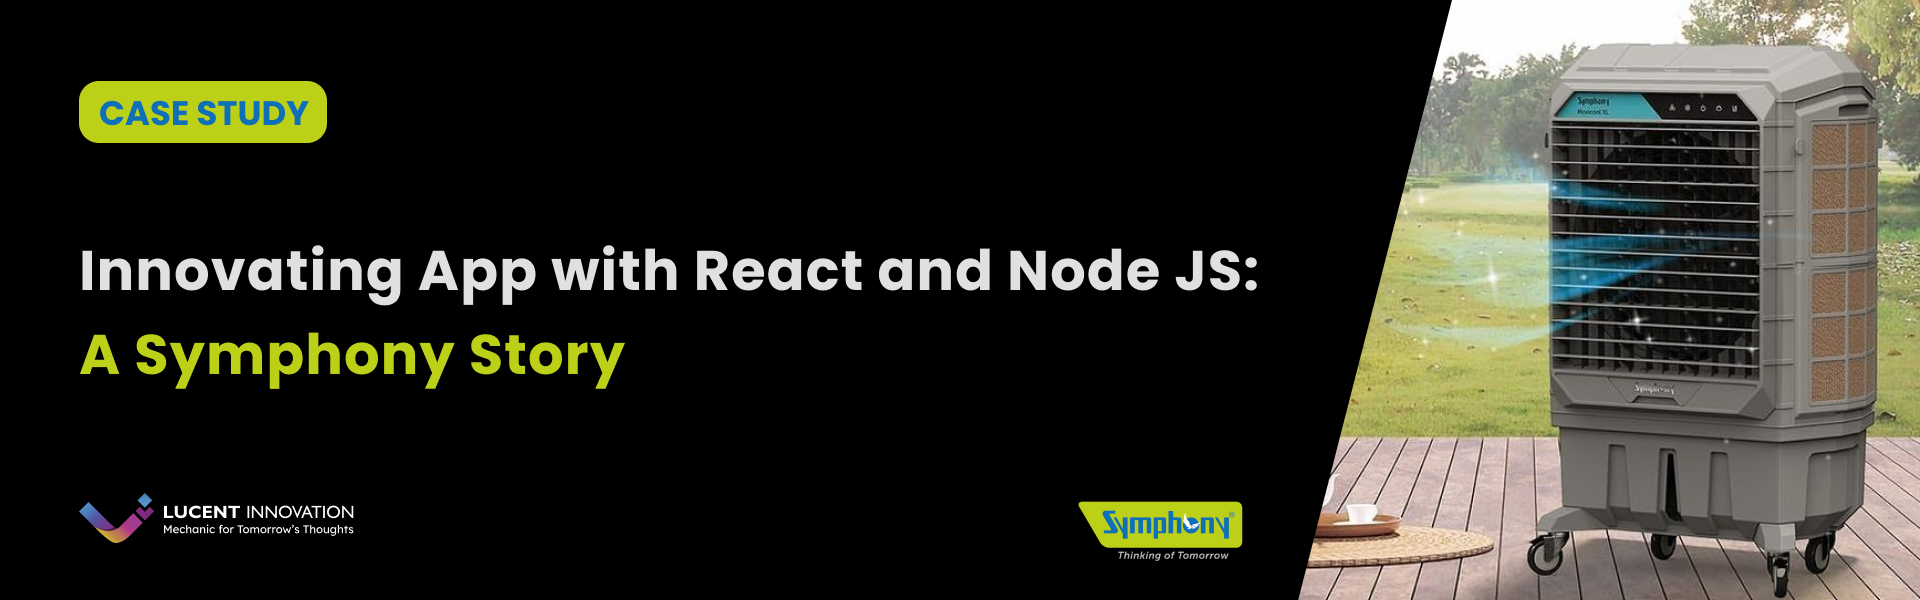 Innovating App with React and Node JS: A Symphony Story